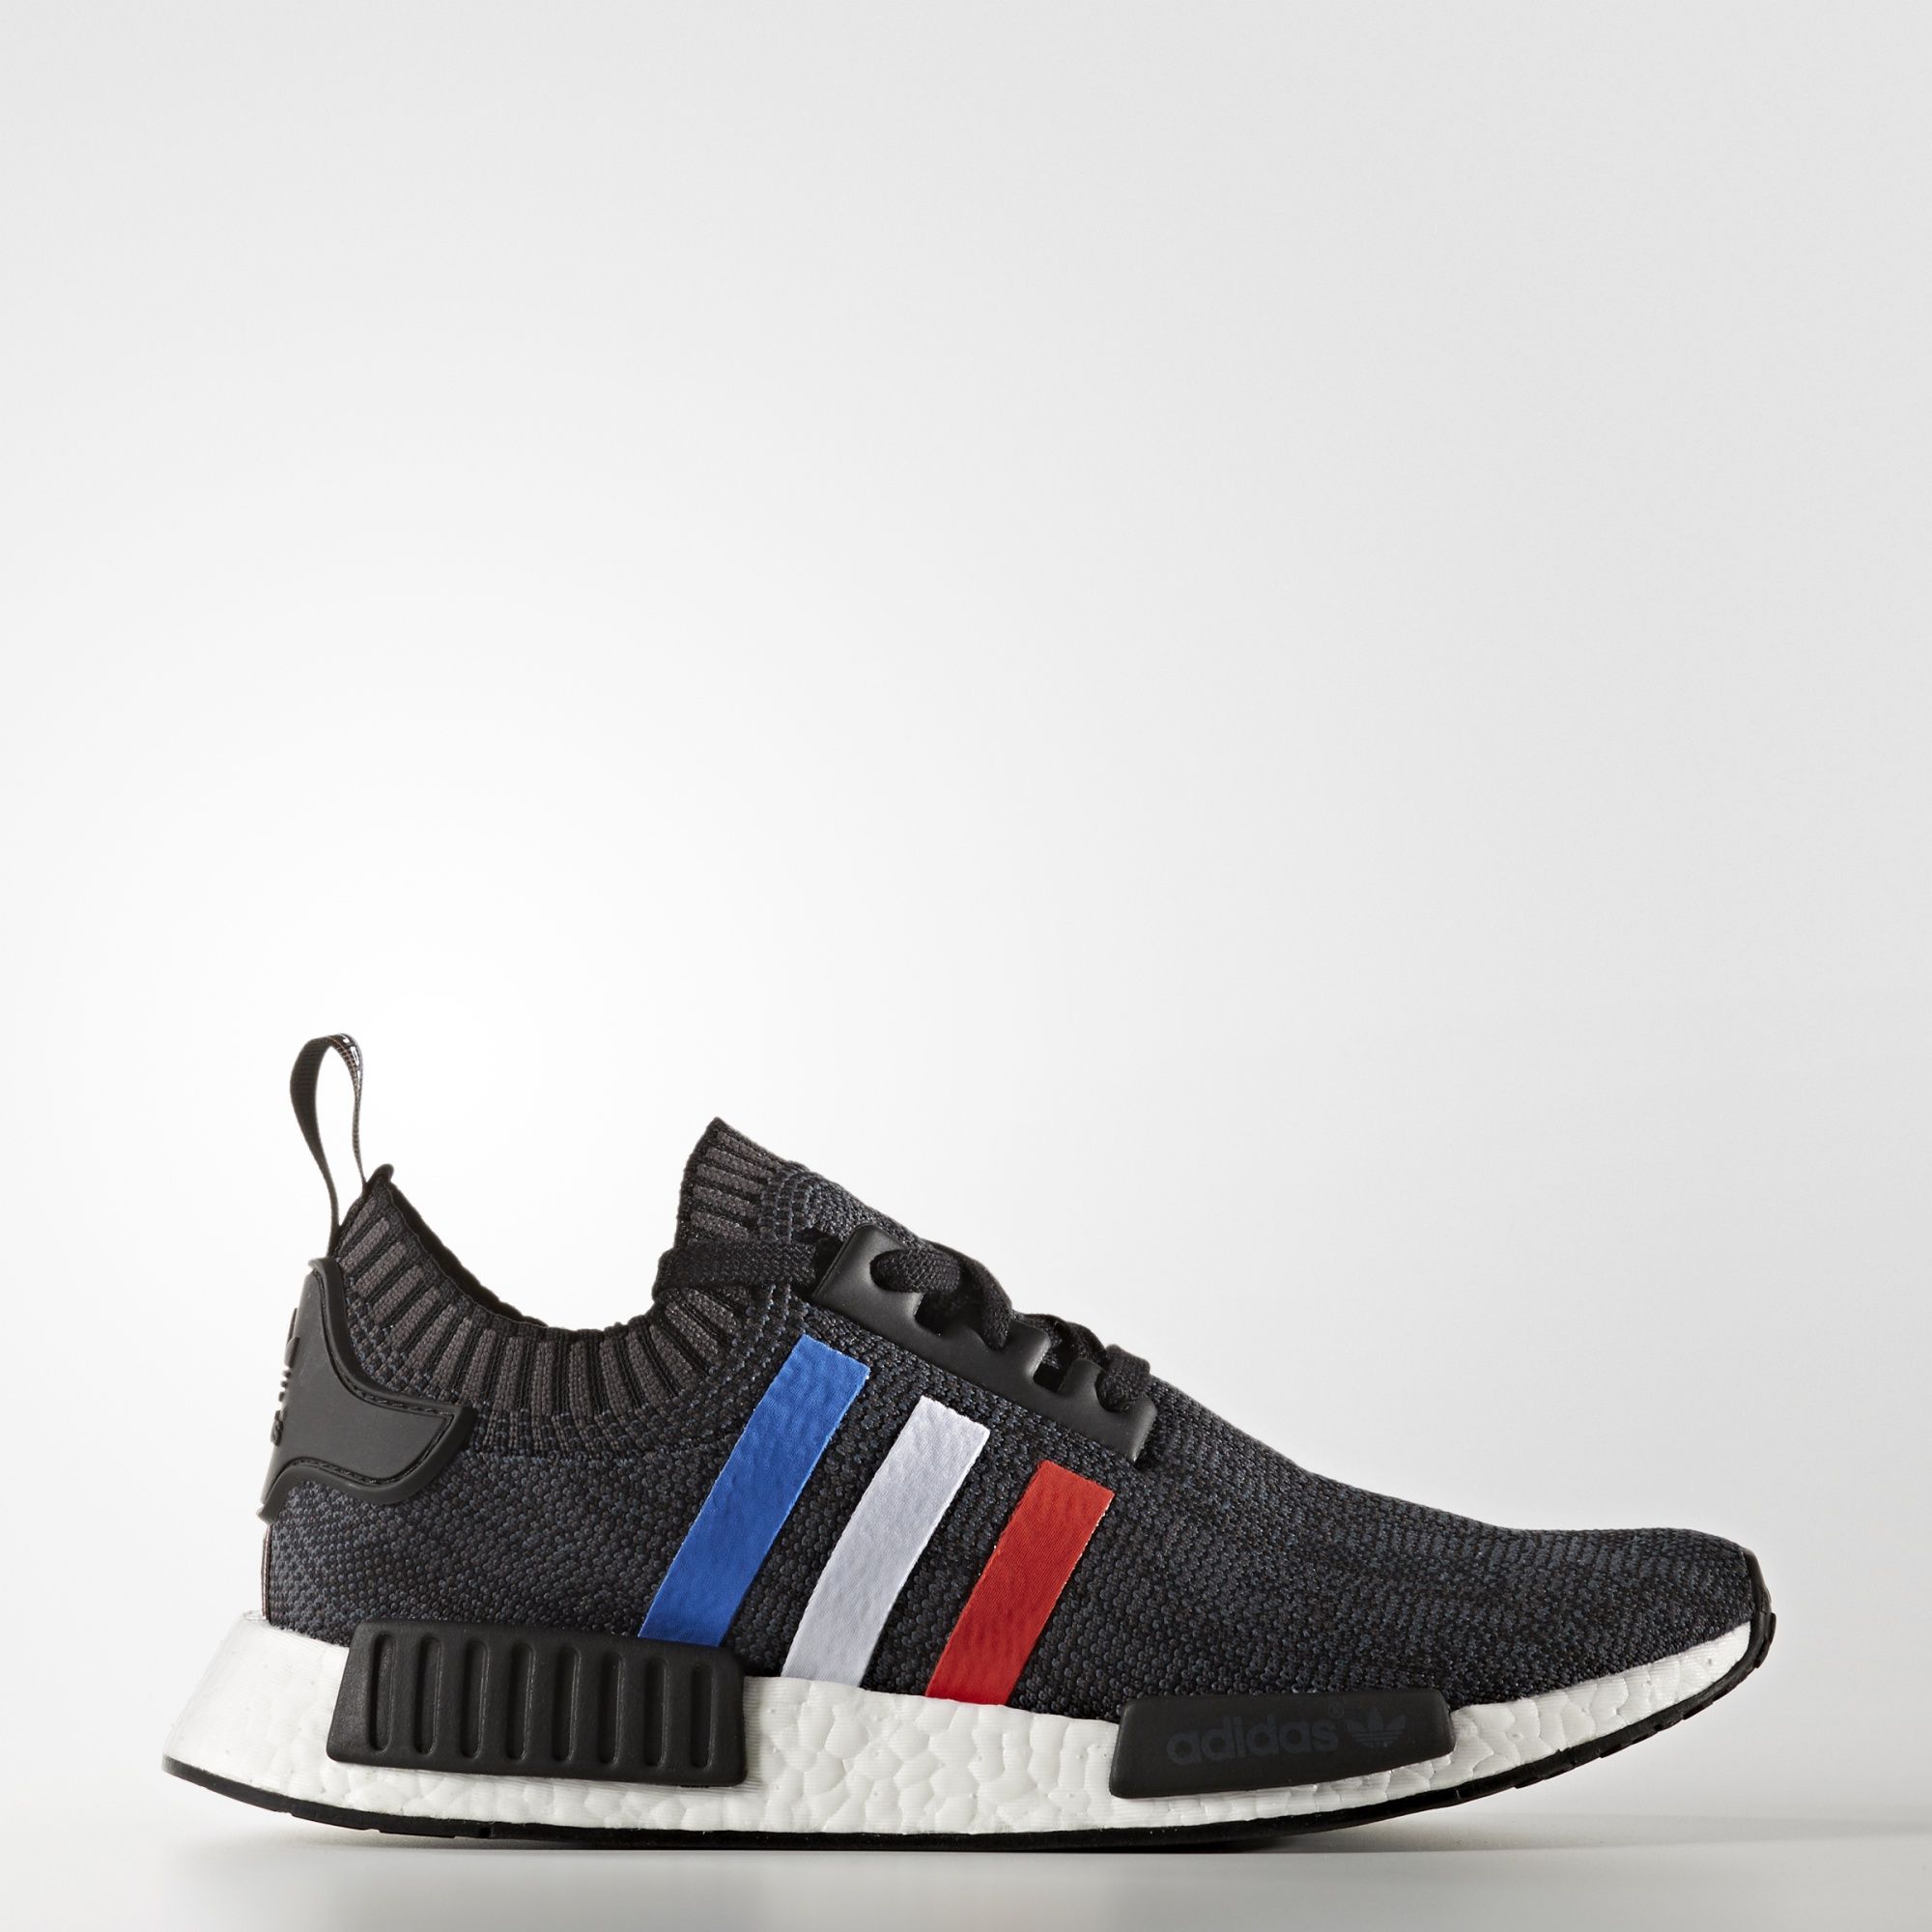 Adidas NMD_R1 Primeknit Core Black / Red / White • BB2887 • Inside Sneakers